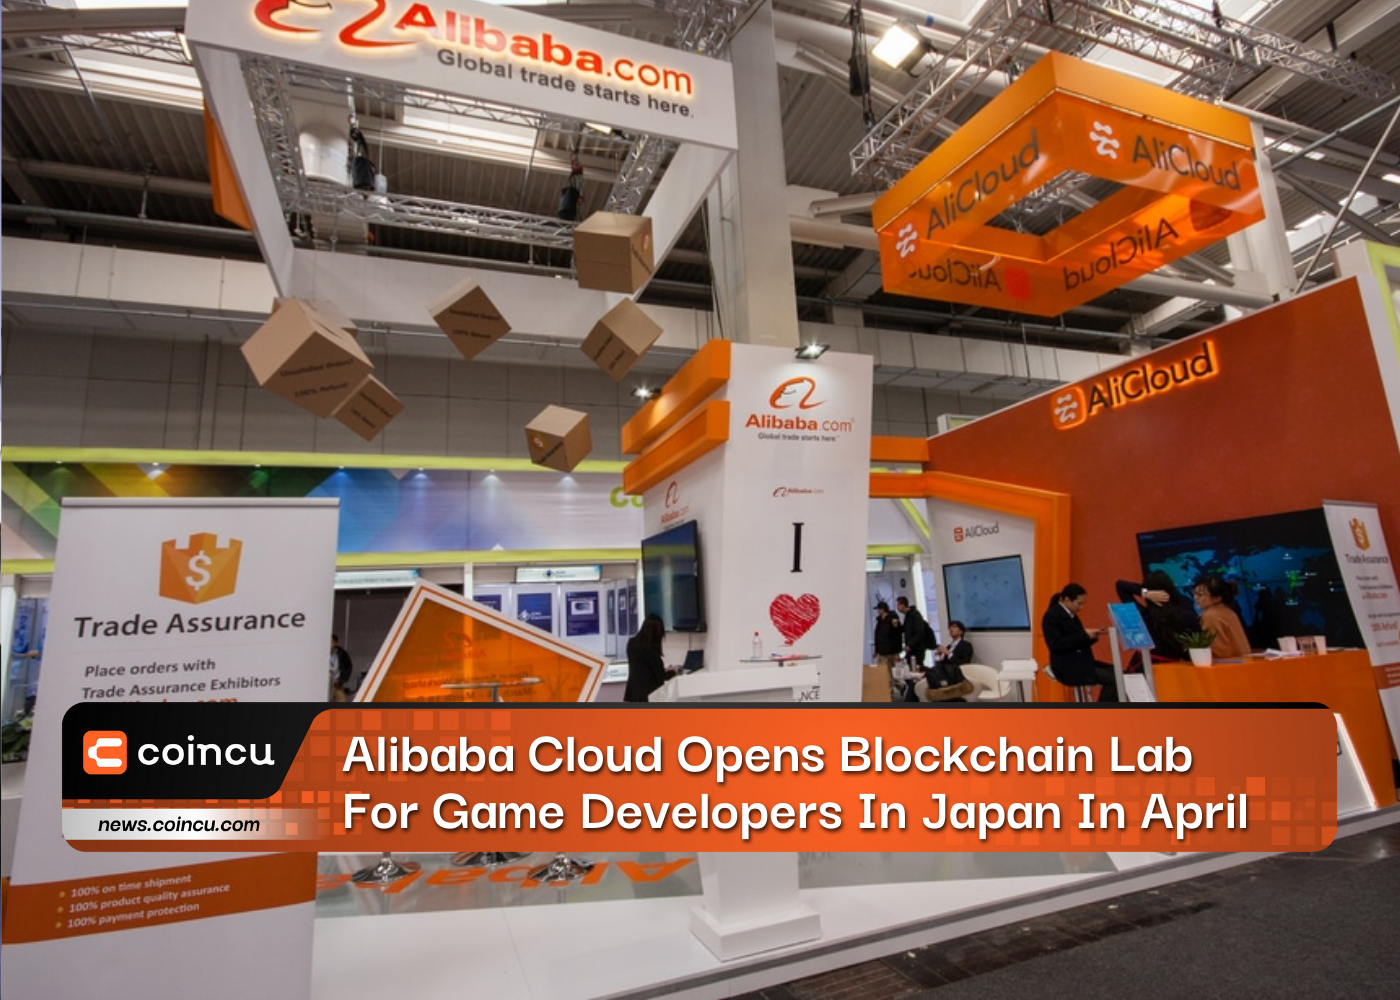 Alibaba Cloud Opens Blockchain Lab For Game Developers In Japan In April